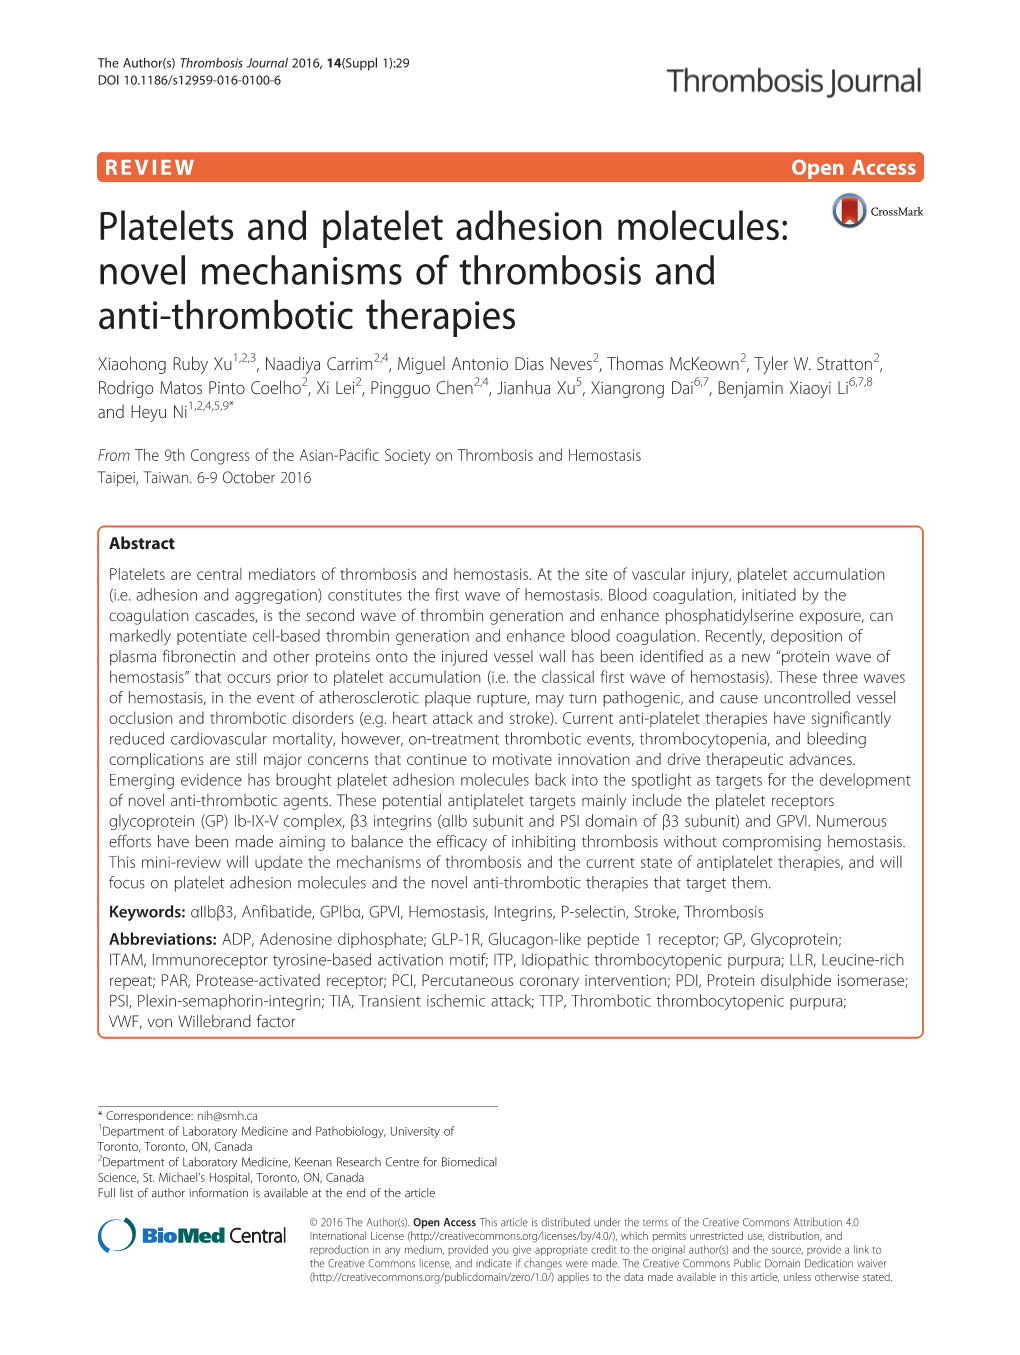 Platelets and Platelet Adhesion Molecules: Novel Mechanisms of Thrombosis and Anti-Thrombotic Therapies